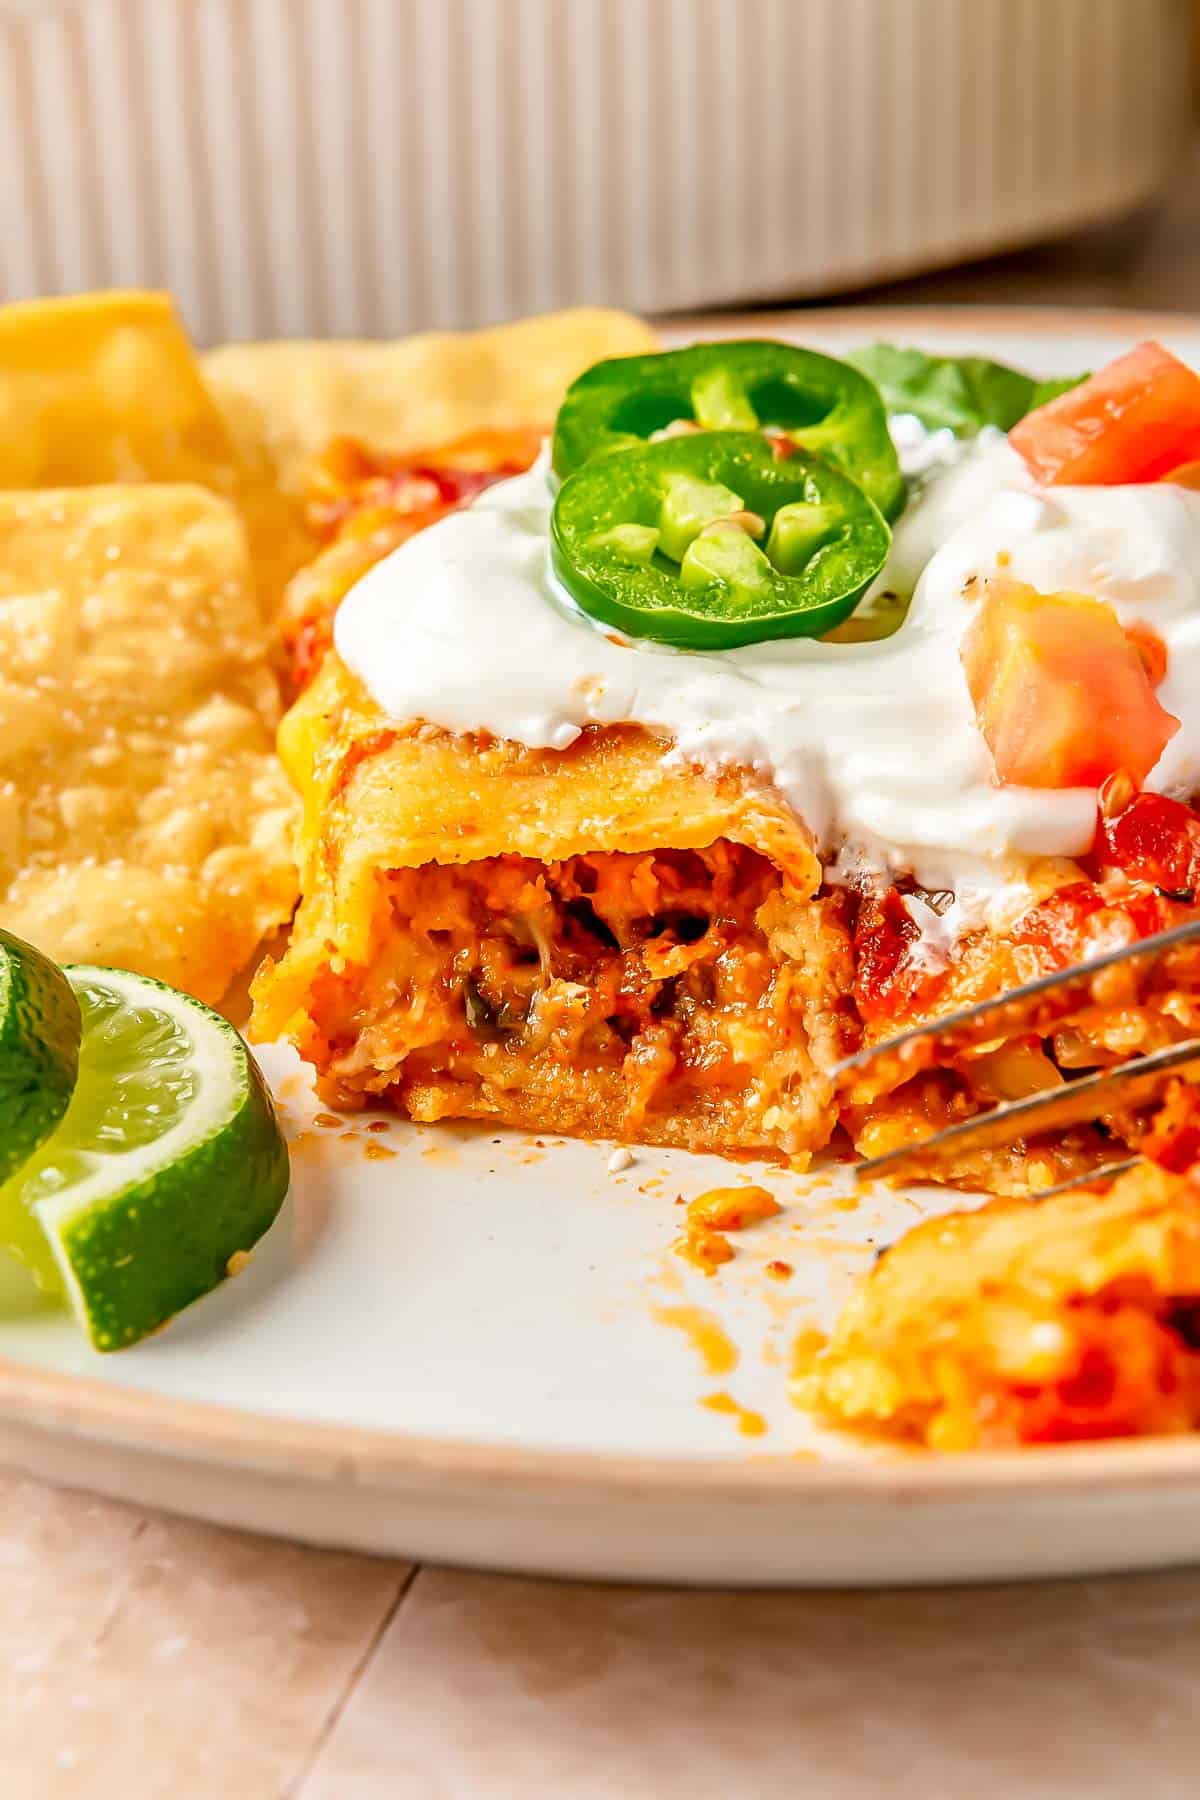 a beef enchilada has been sliced into to reveal the insides